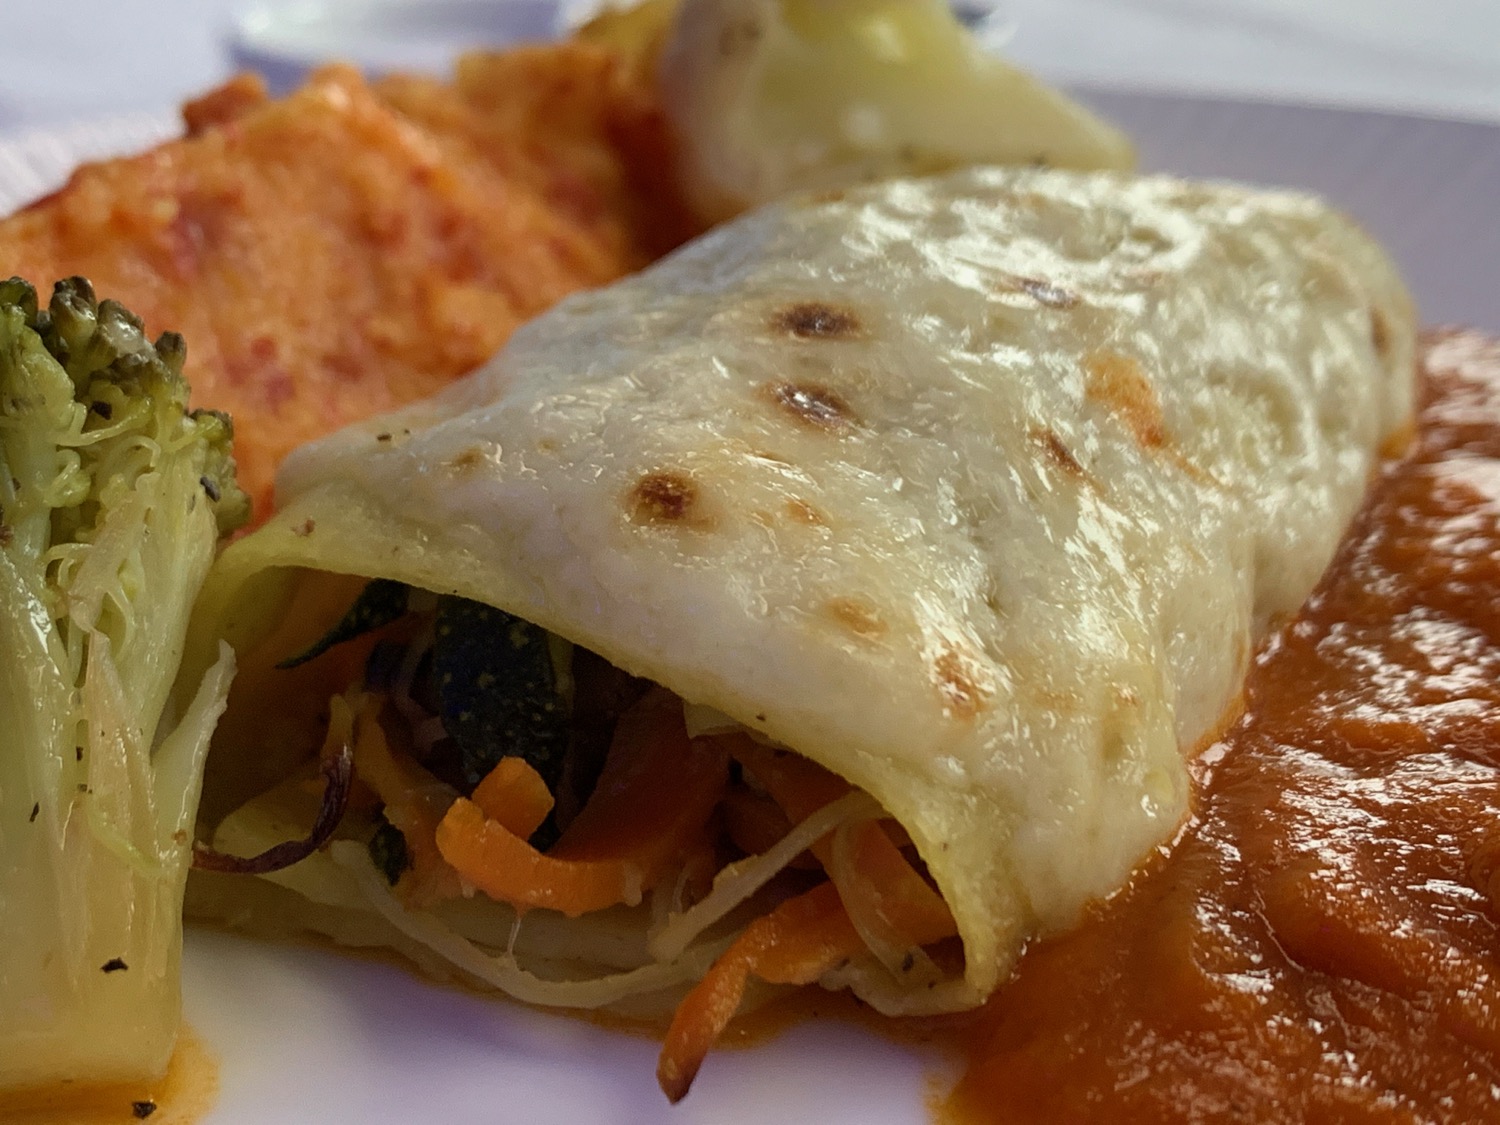 a burrito with vegetables and sauce on a plate